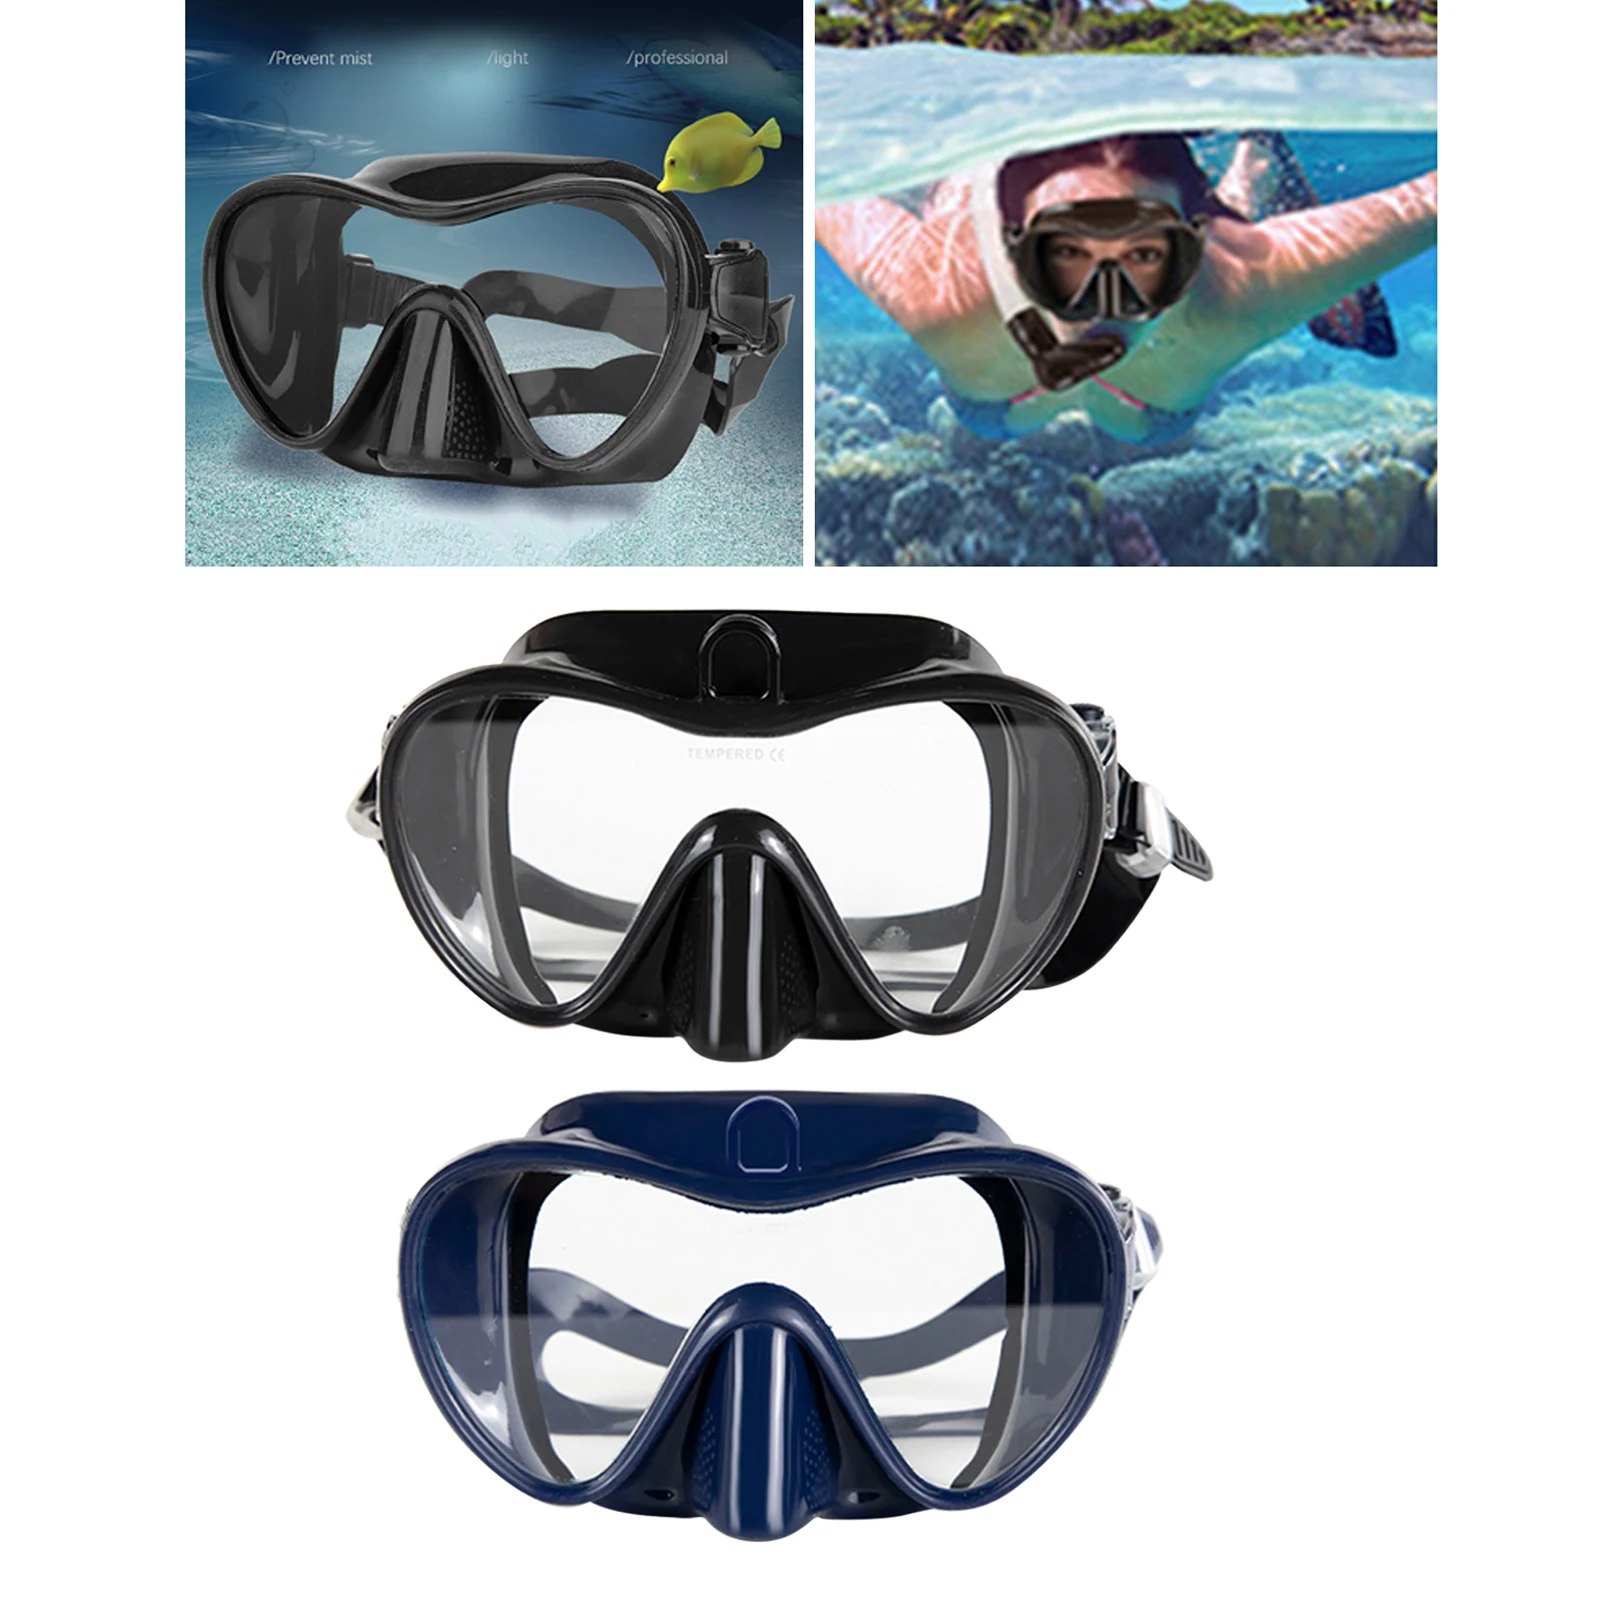 Full Dry Silicone Diving Mask Mask Snorkeling Suit Swimming GlassesBZ 